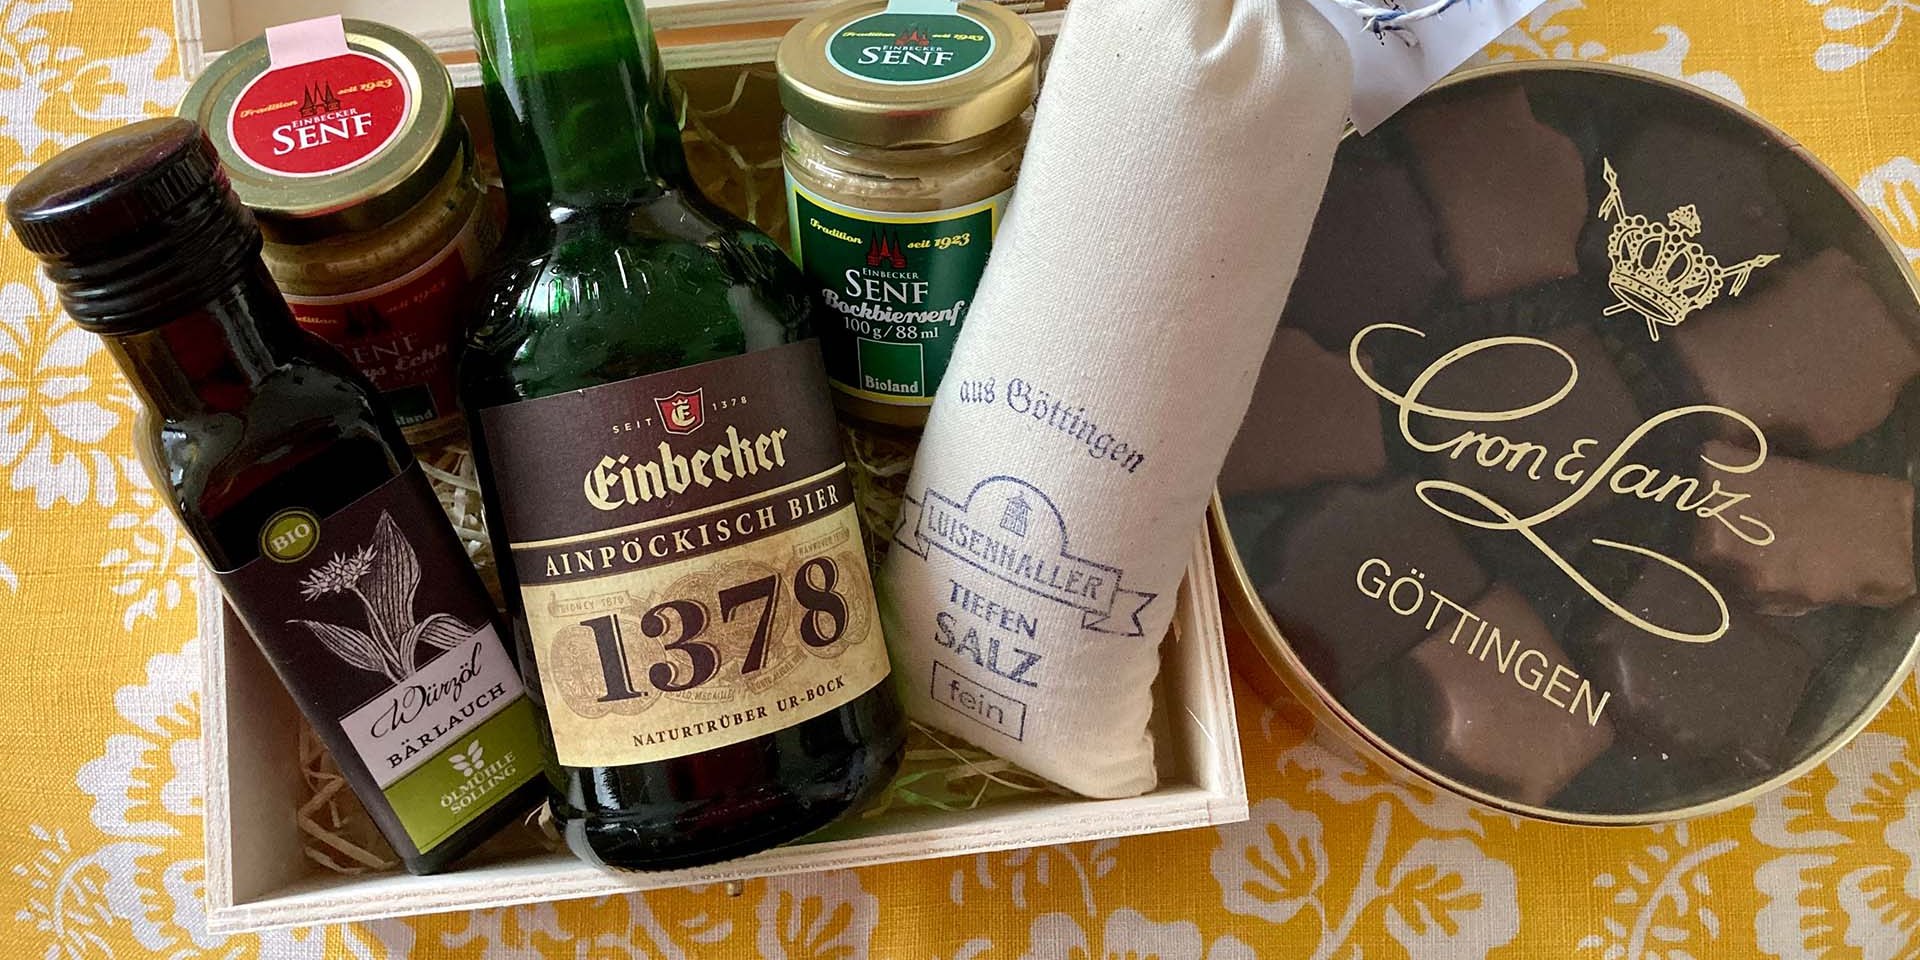 Selection of culinary products from southern Niedersachsen (Lower Saxony), © TourismusMarketing Niedersachsen GmbH/myhappyplaces